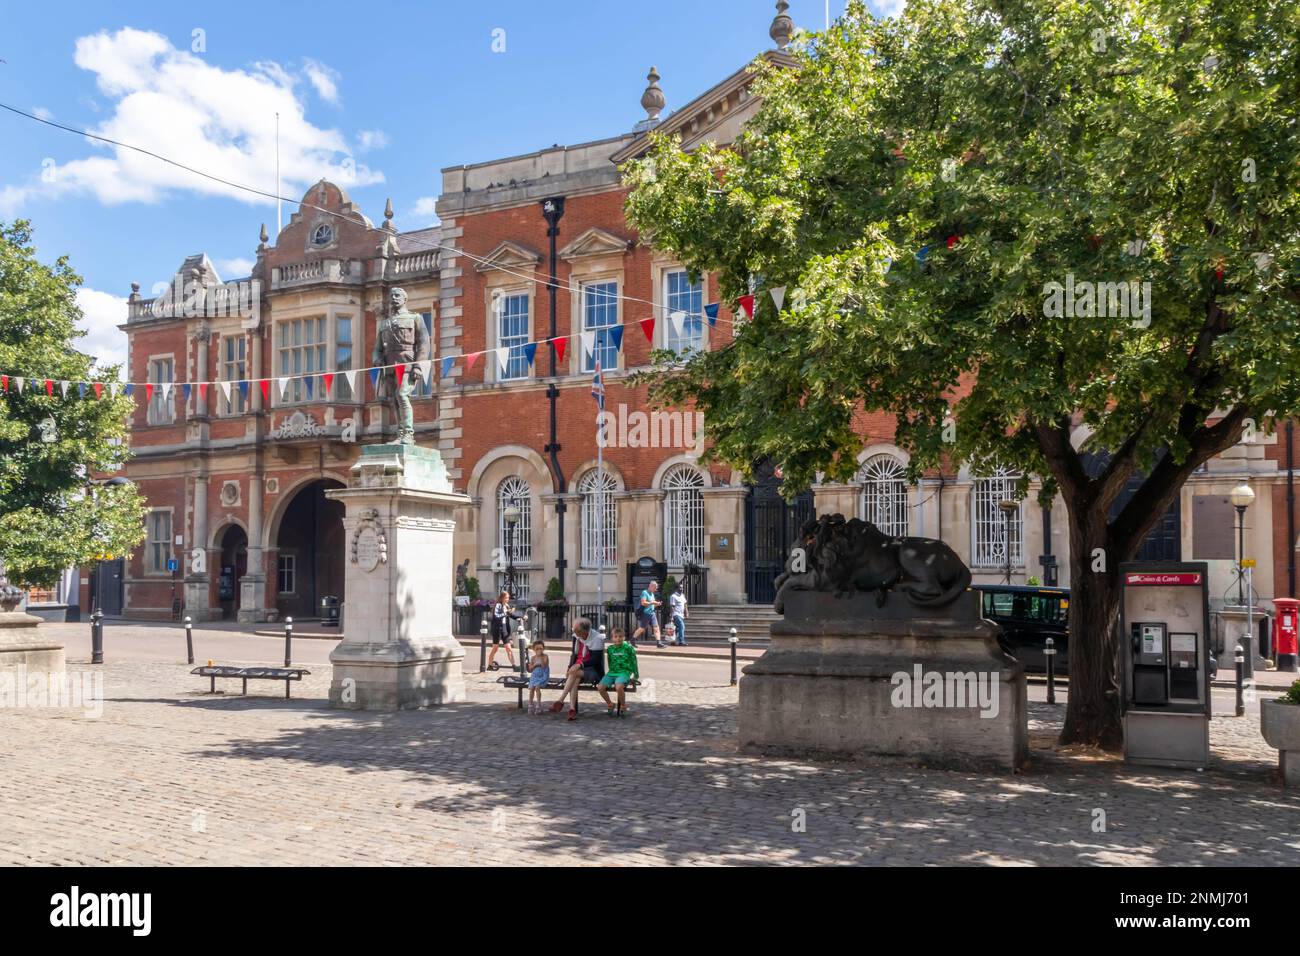 Aylesbury, England - August 5th 2022: Statue of Charles Crompton with the old County Hall in the background. This is the Market Square in the town. Stock Photo